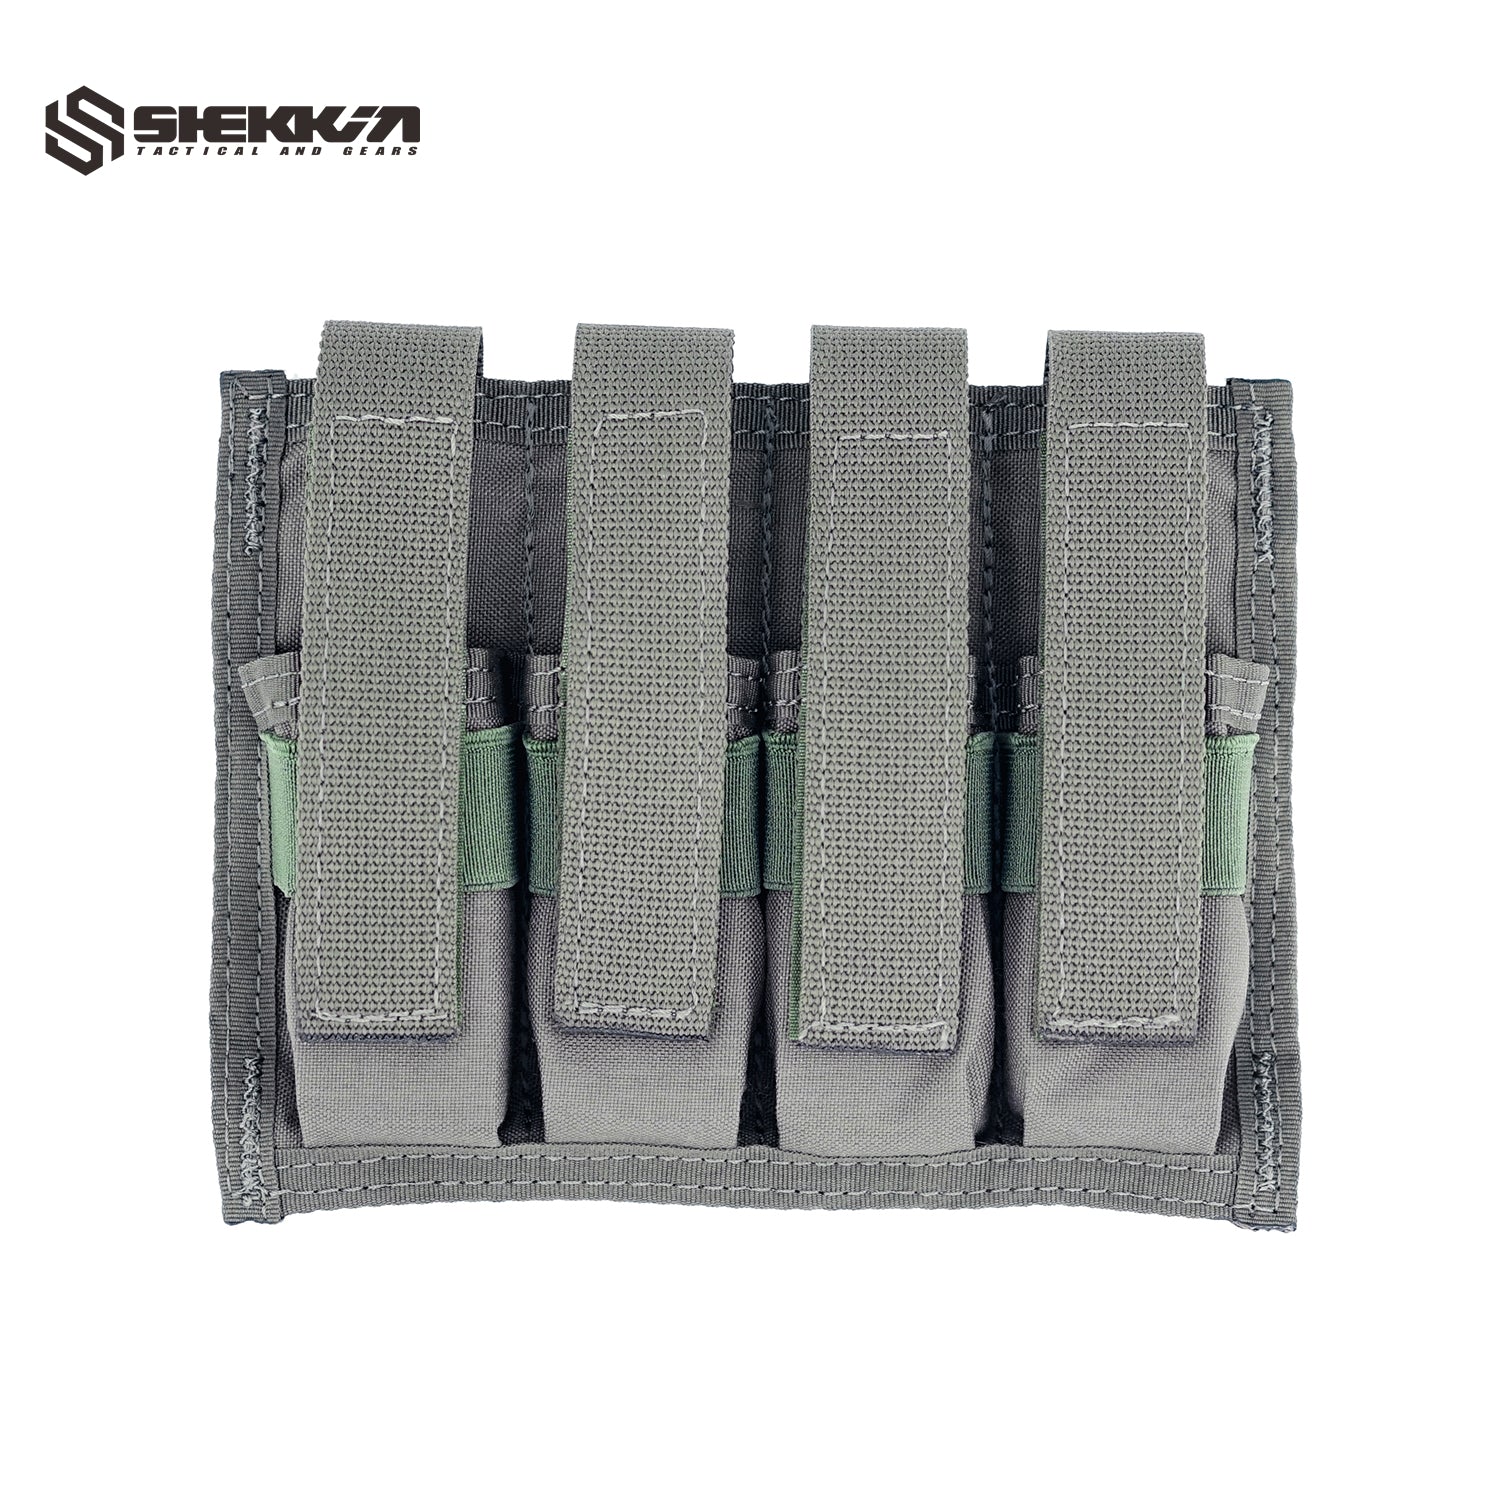 Pre MSA Paraclete style Quad Pistol Mag Pouches - Shekkin Gears